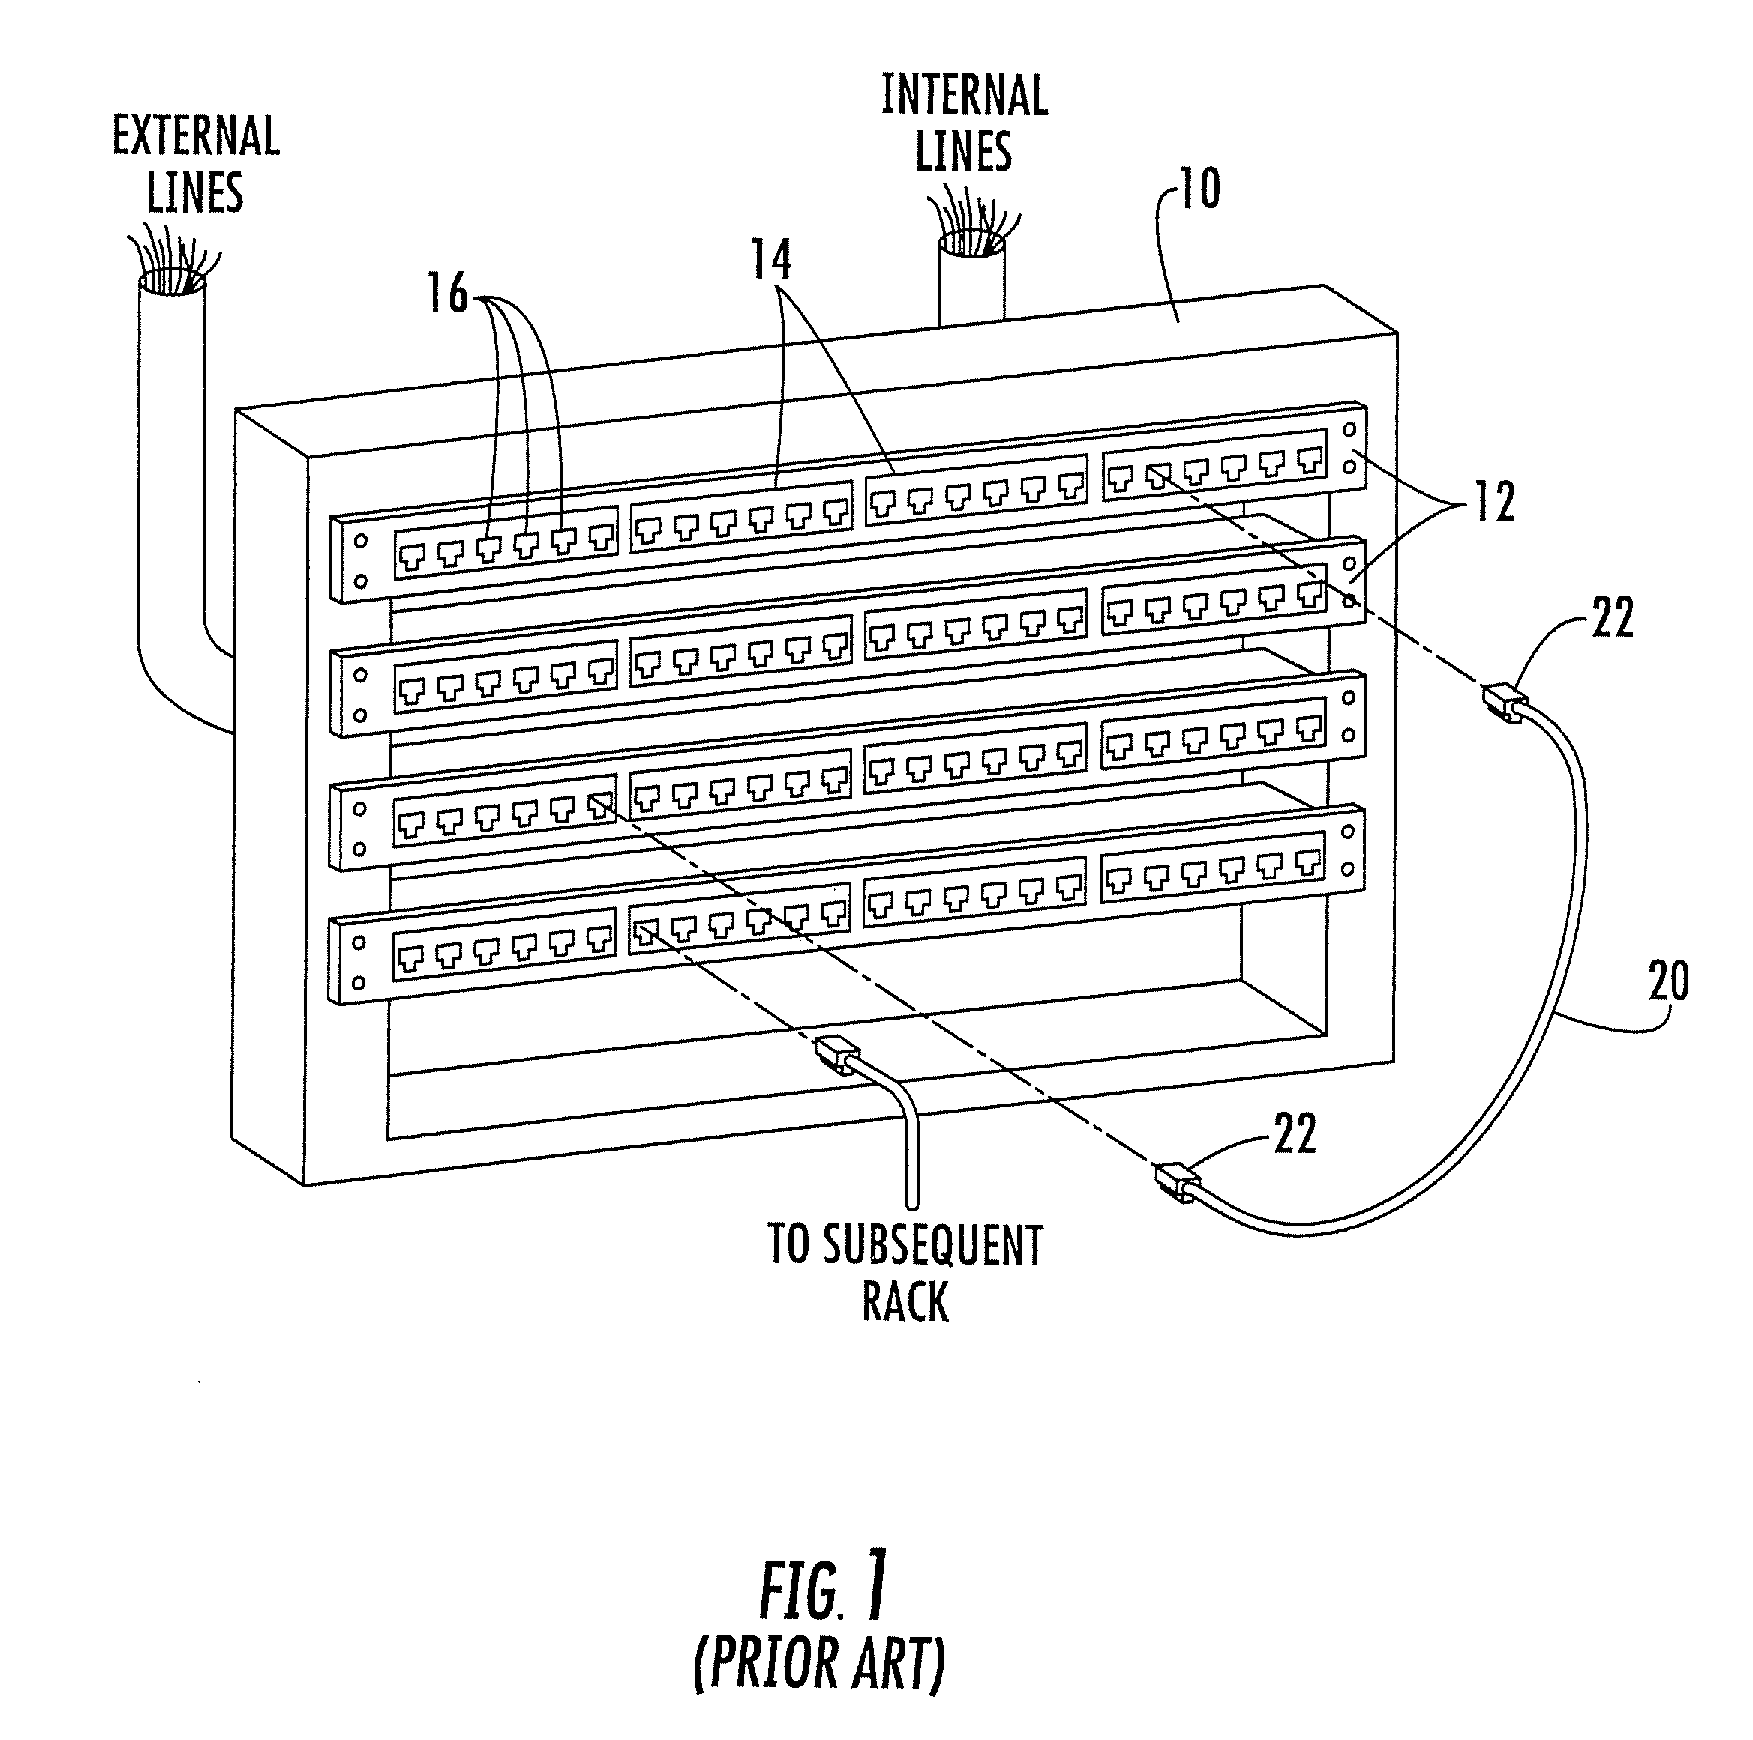 Methods, systems and computer program products for using time domain reflectometry signatures to monitor network communication lines